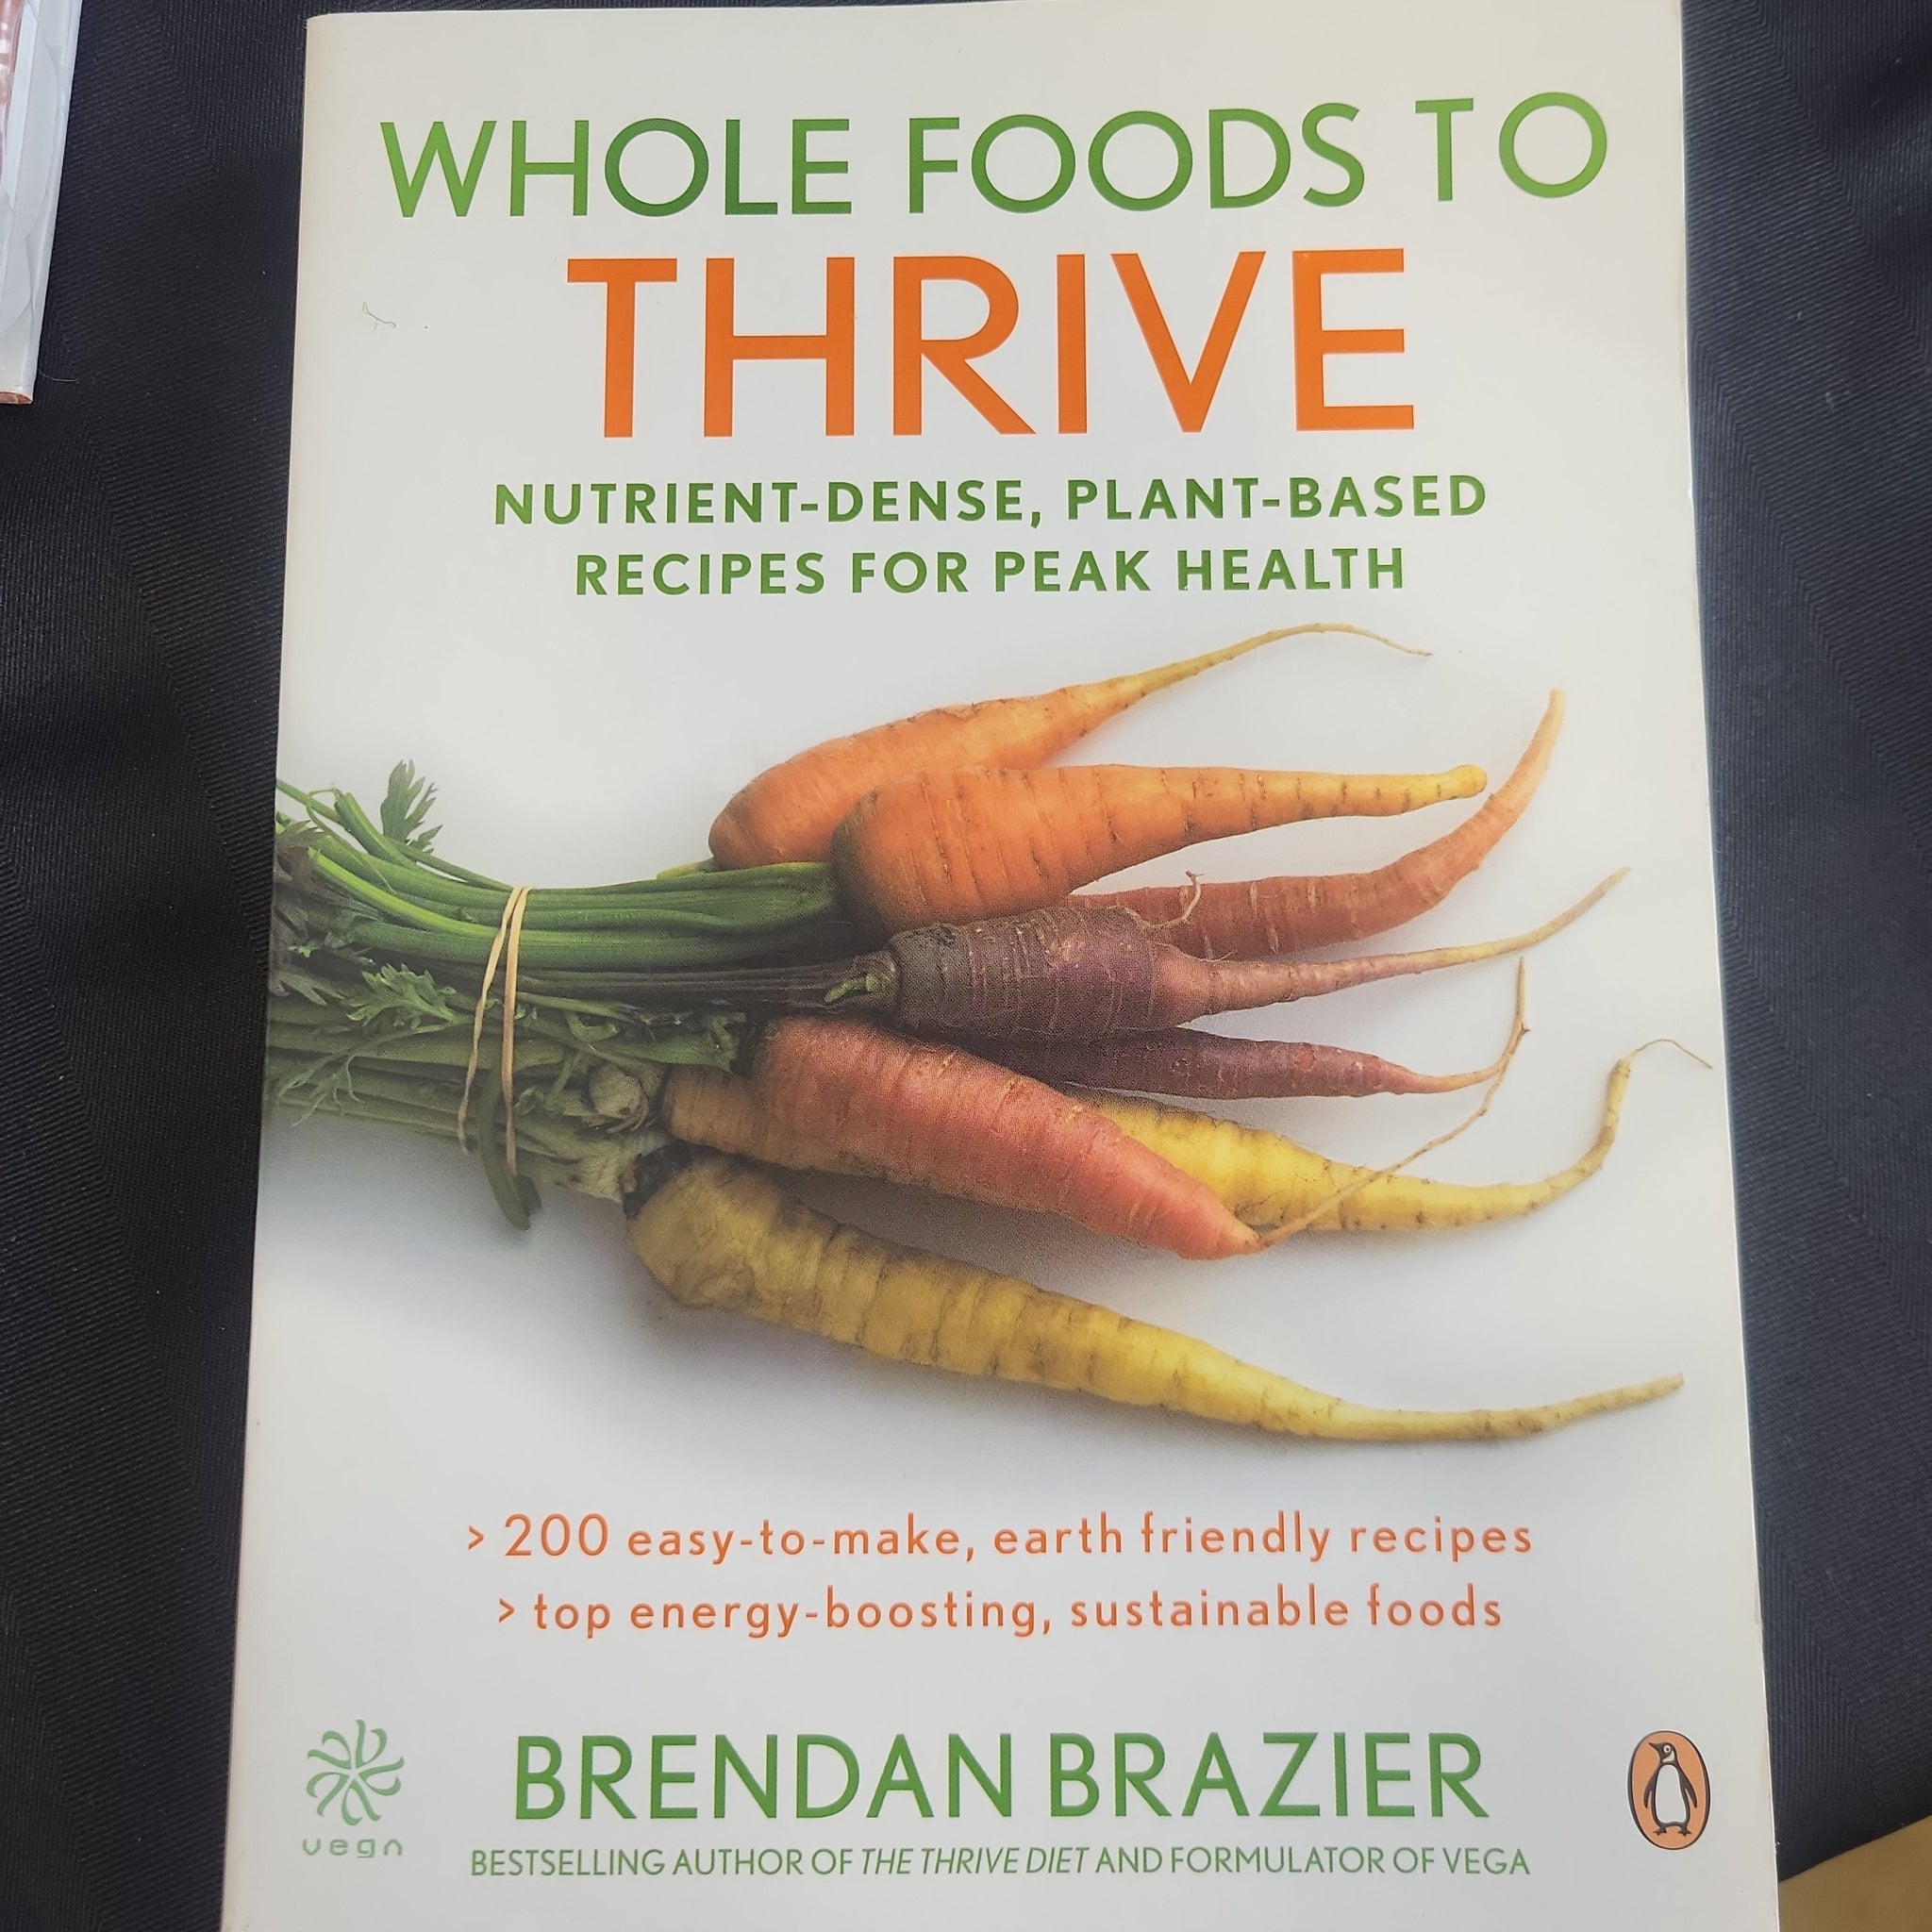 Whole Foods To Thrive: Nutrient-dense Plant-based Recipes For Peak Health